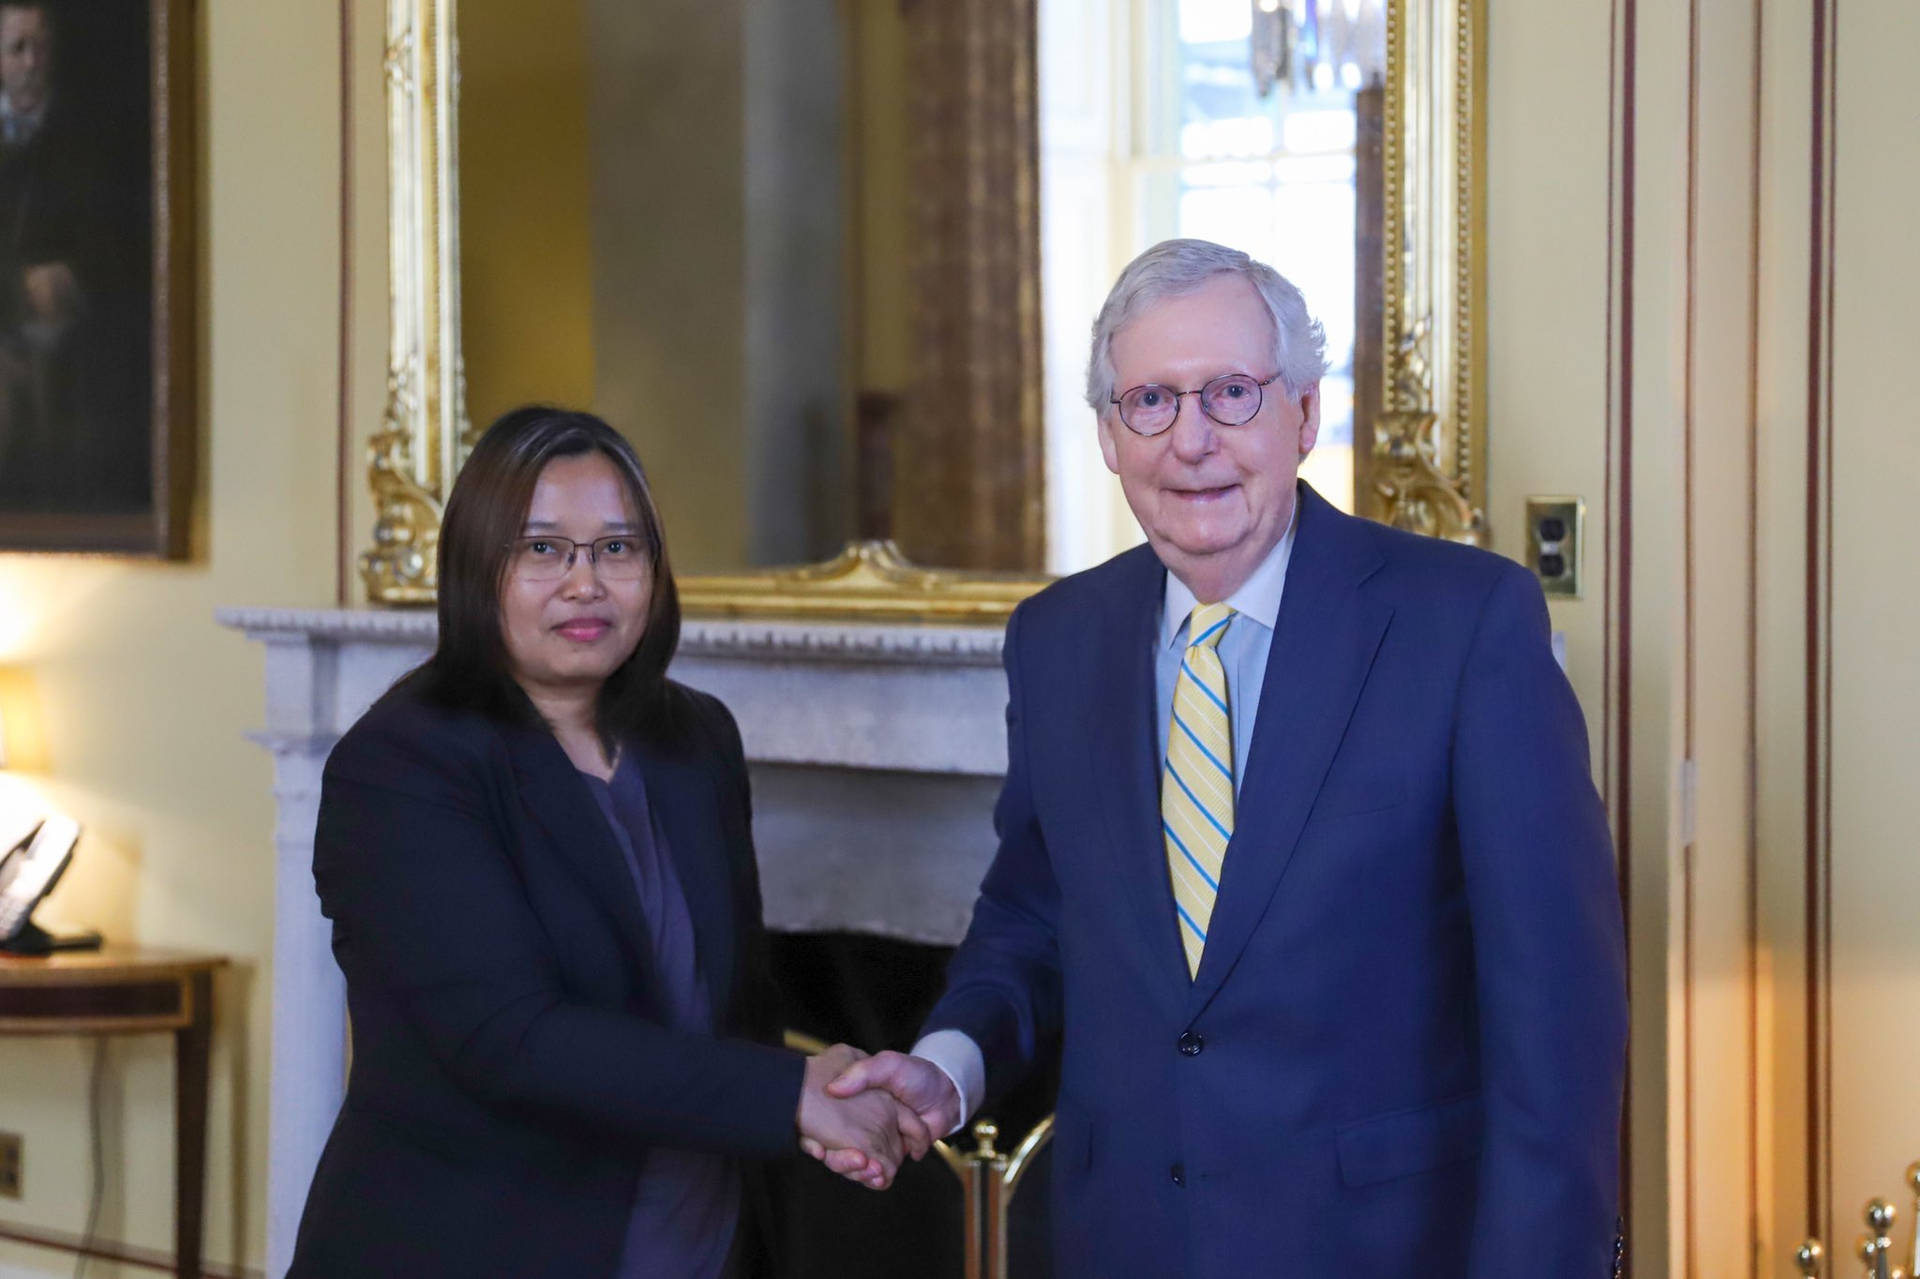 Mitch McConnell in discussion with Zin Mar Aung Wallpaper